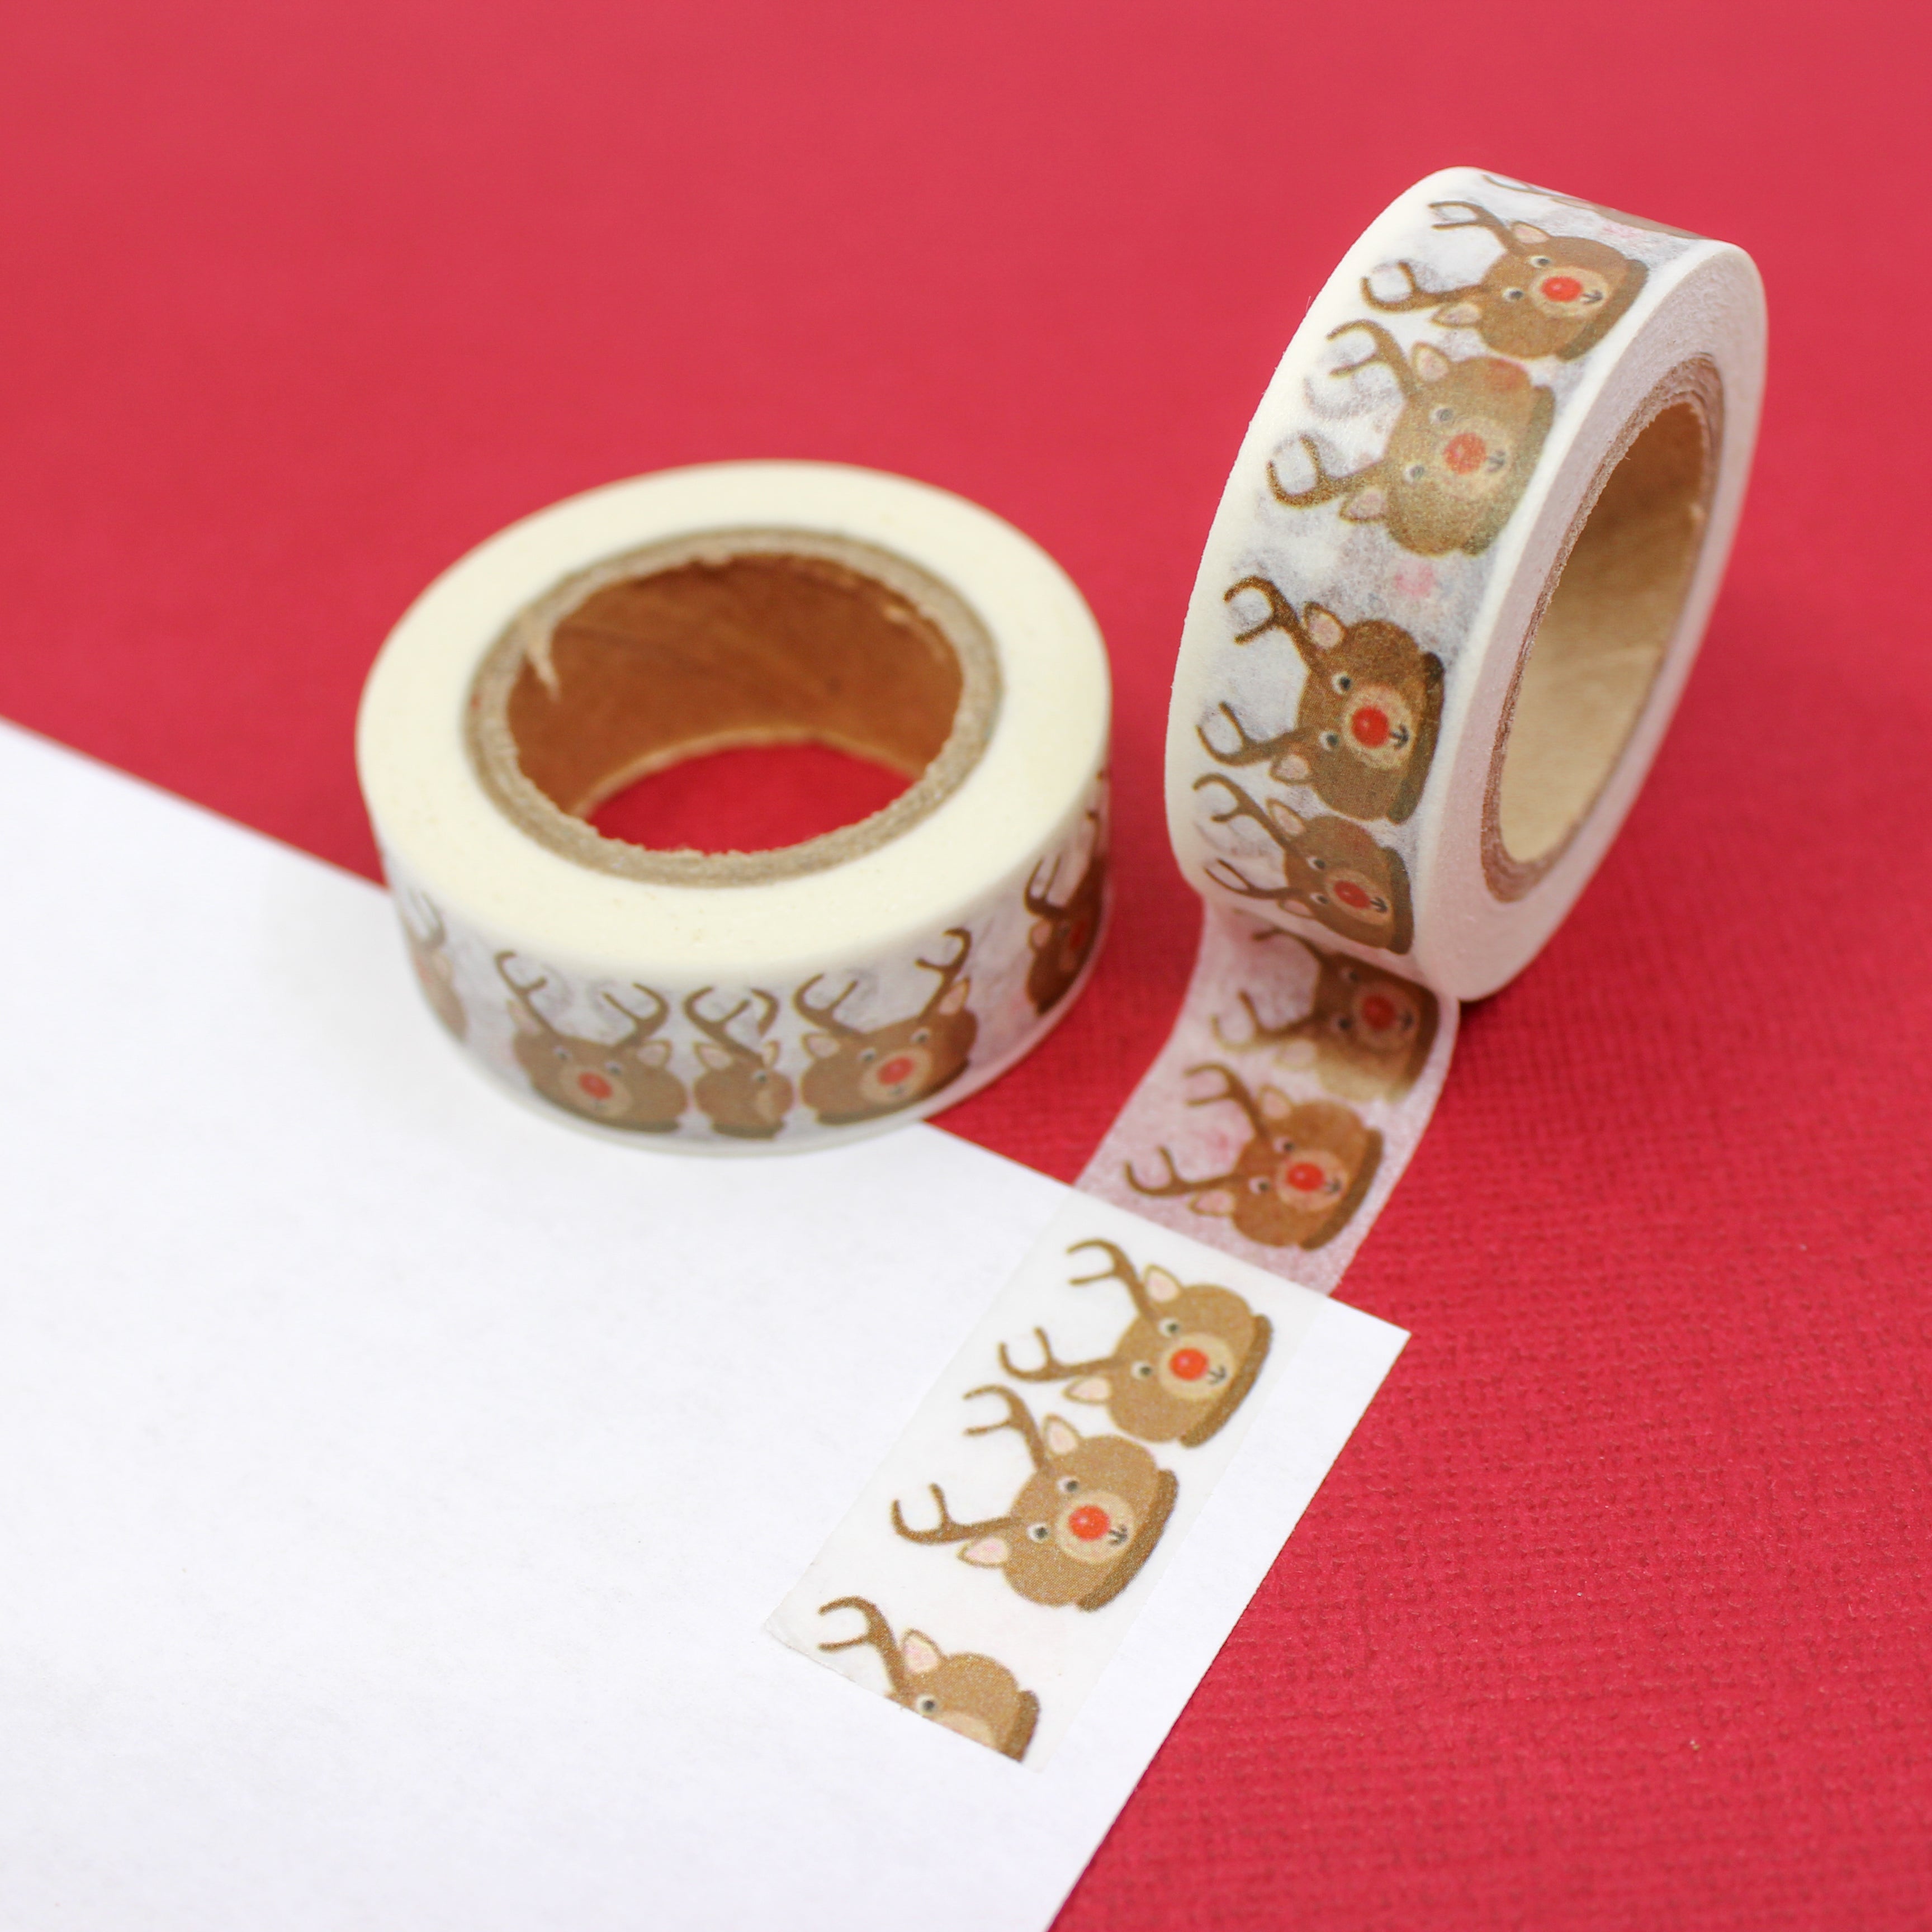 This is a brown Rudolf the Red Nose Reindeer head washi tape from BBB Supplies Craft Shop